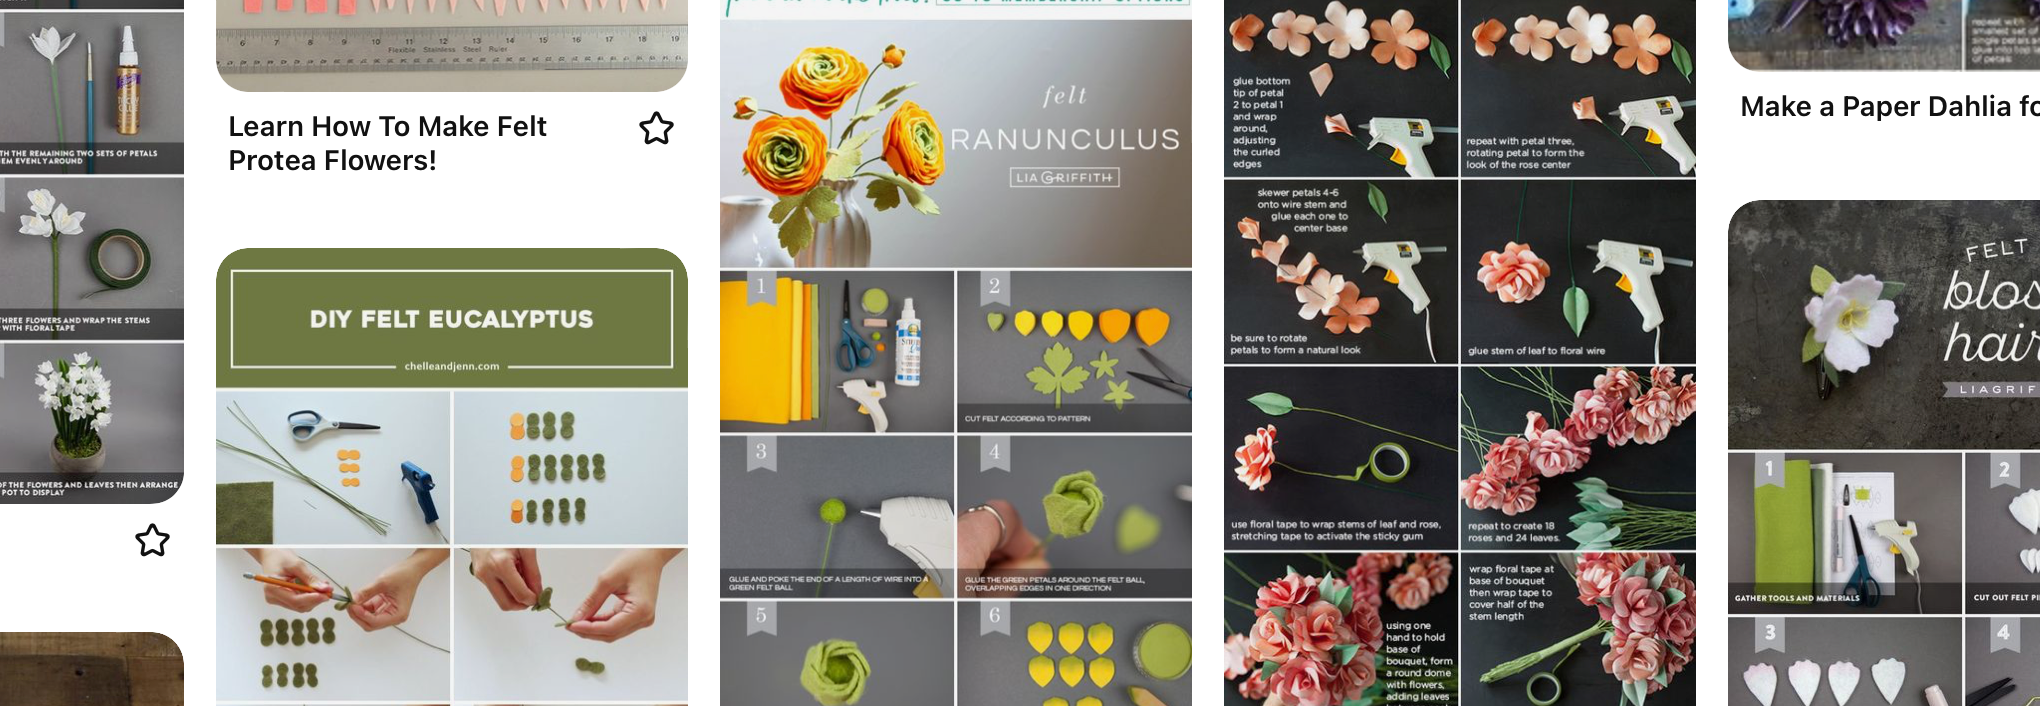 Screen shot of Pinterest board showing fabric and paper flower tutorials.